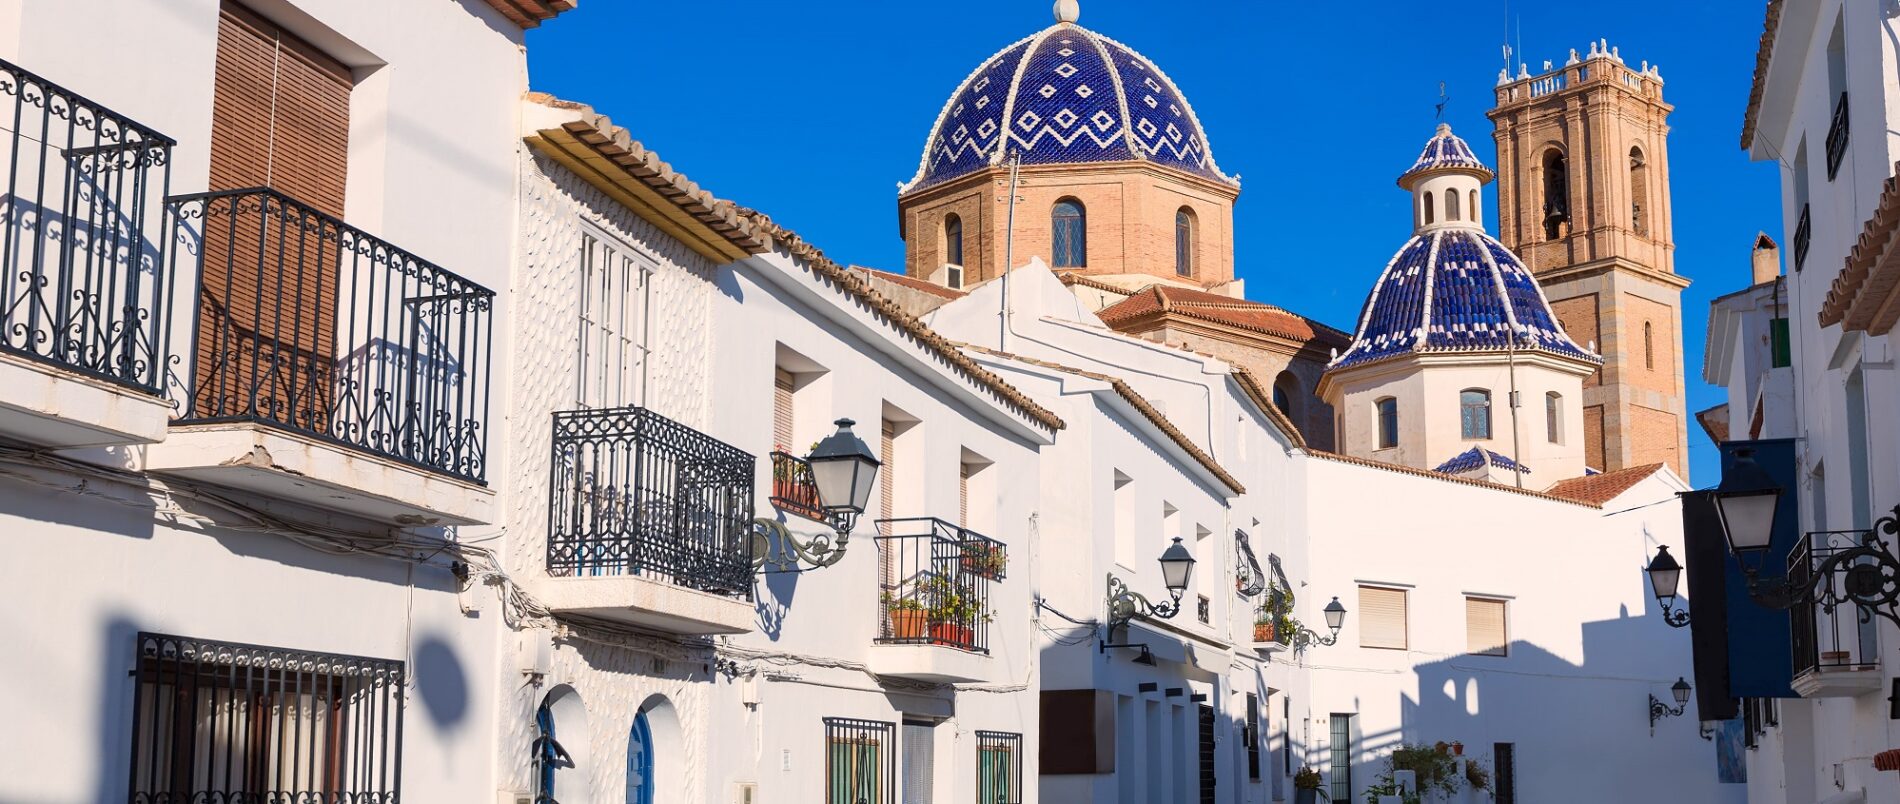 Church in old town of Altea